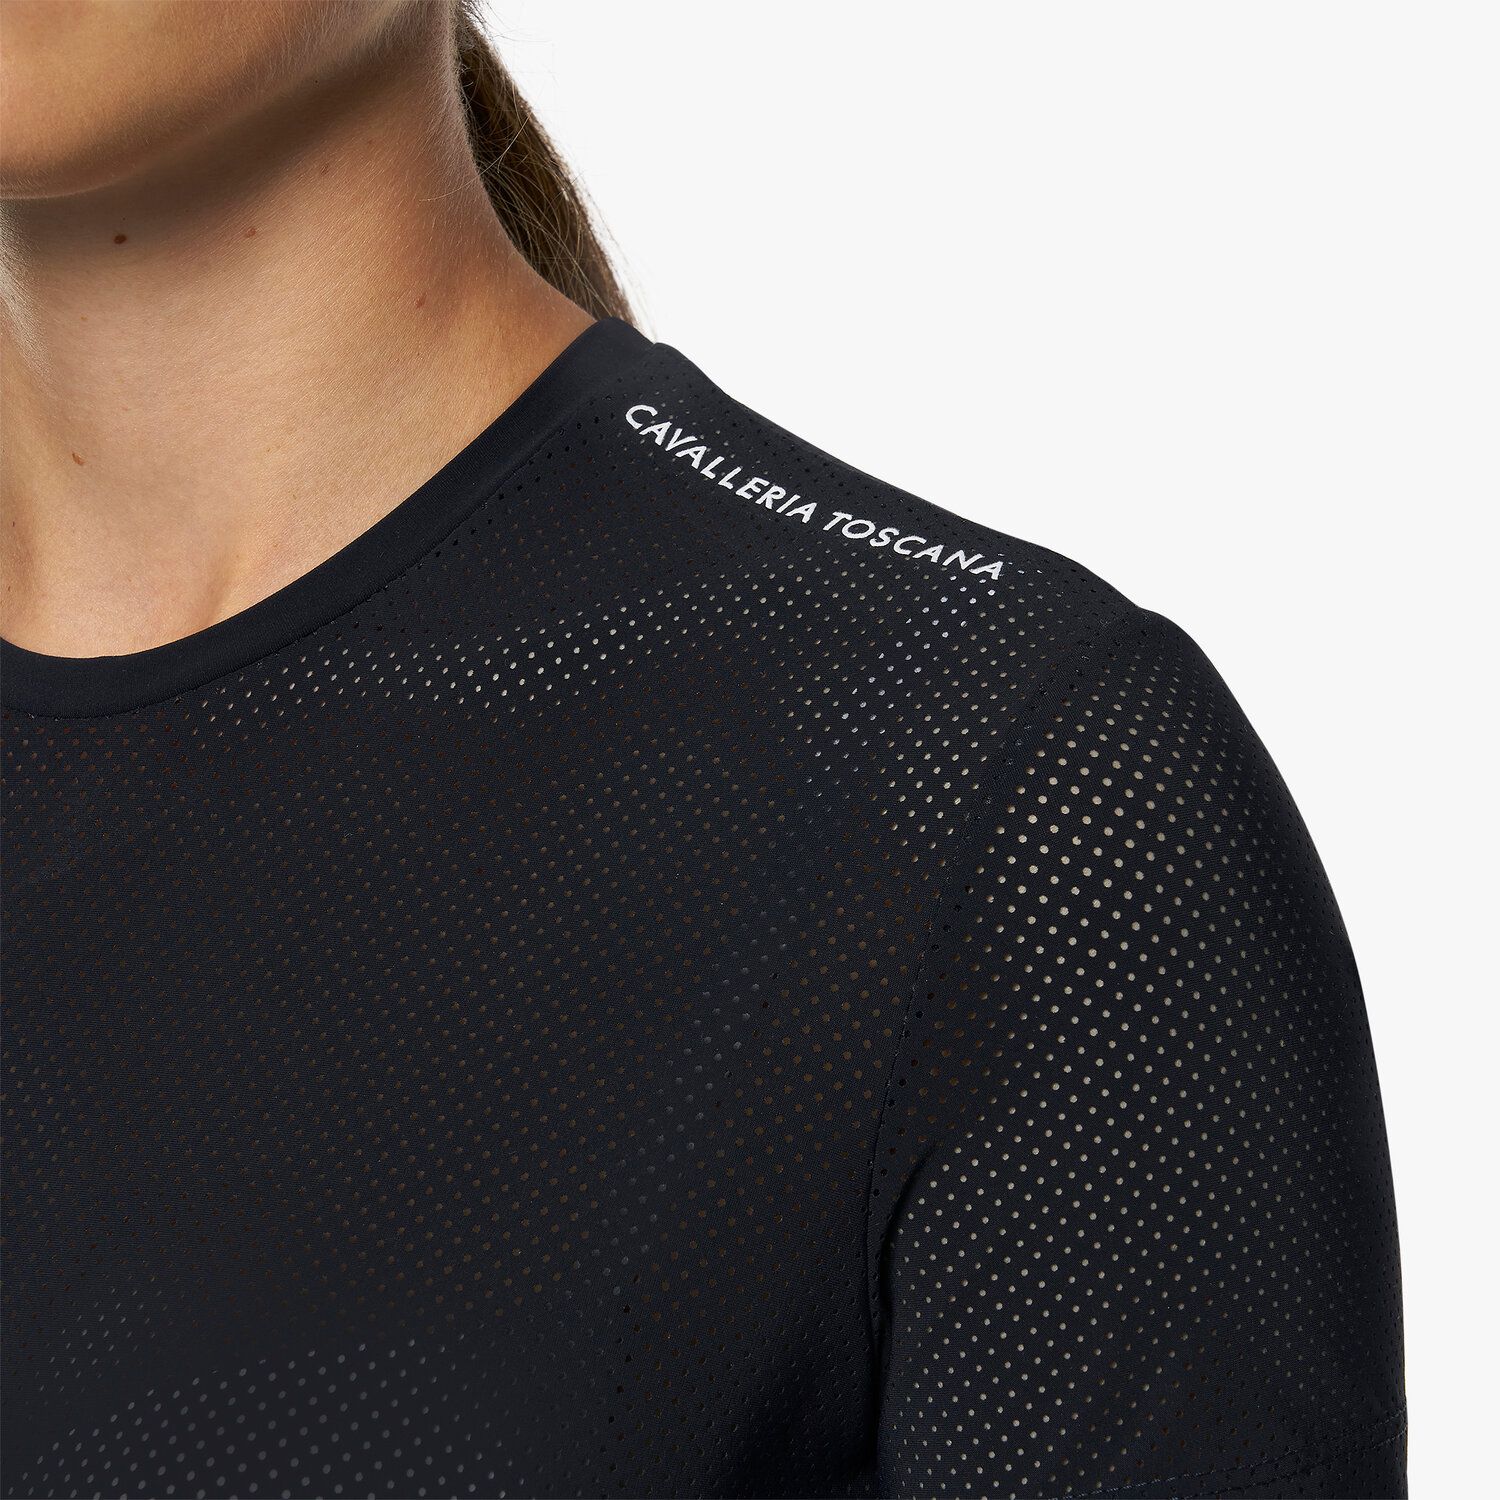 CAVALLERIA TOSCANA Perforated Jersey Strippet T-Shirt